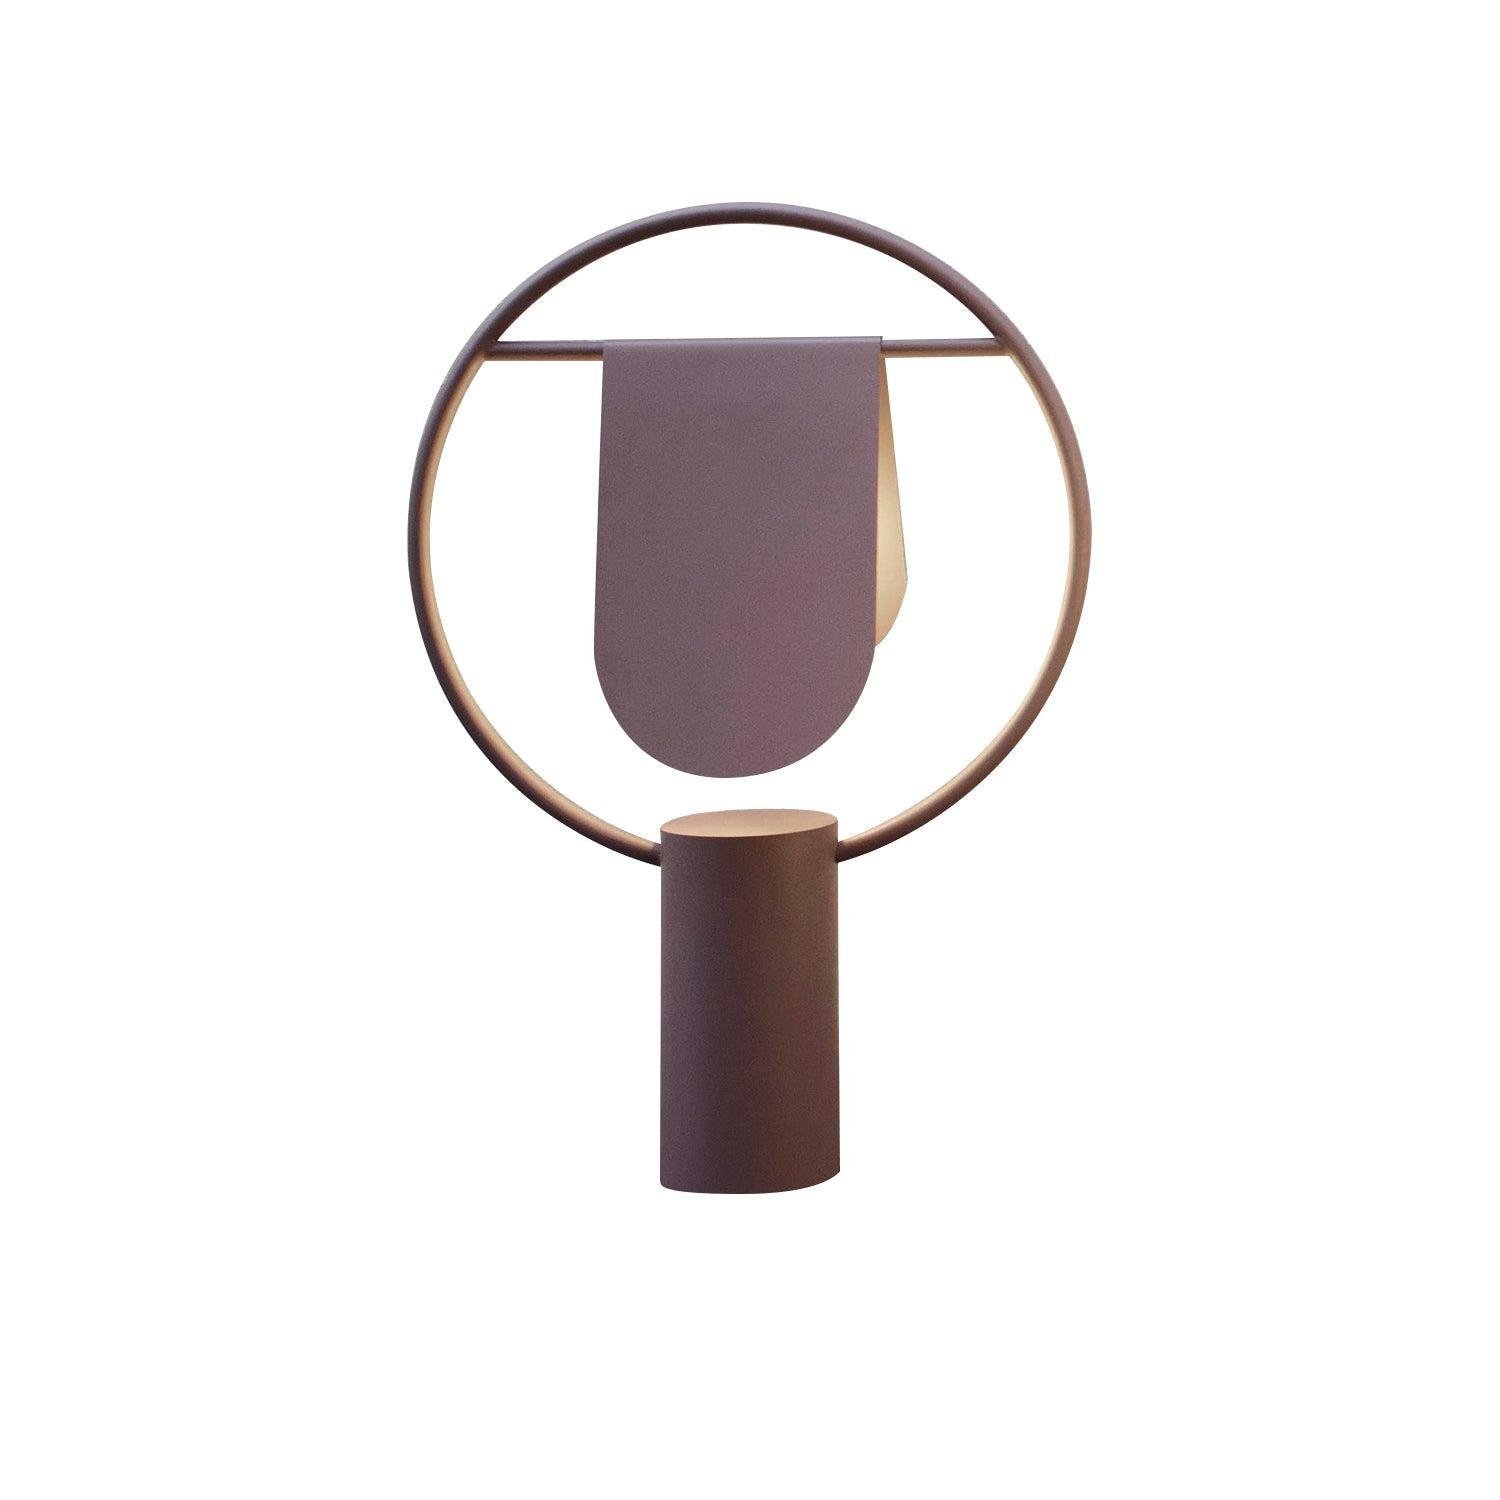 Anae Table Lamp in Pink with EU Plug - Dimensions: 11.8" Diameter x 20.5" Height (30cm Diameter x 52cm Height)